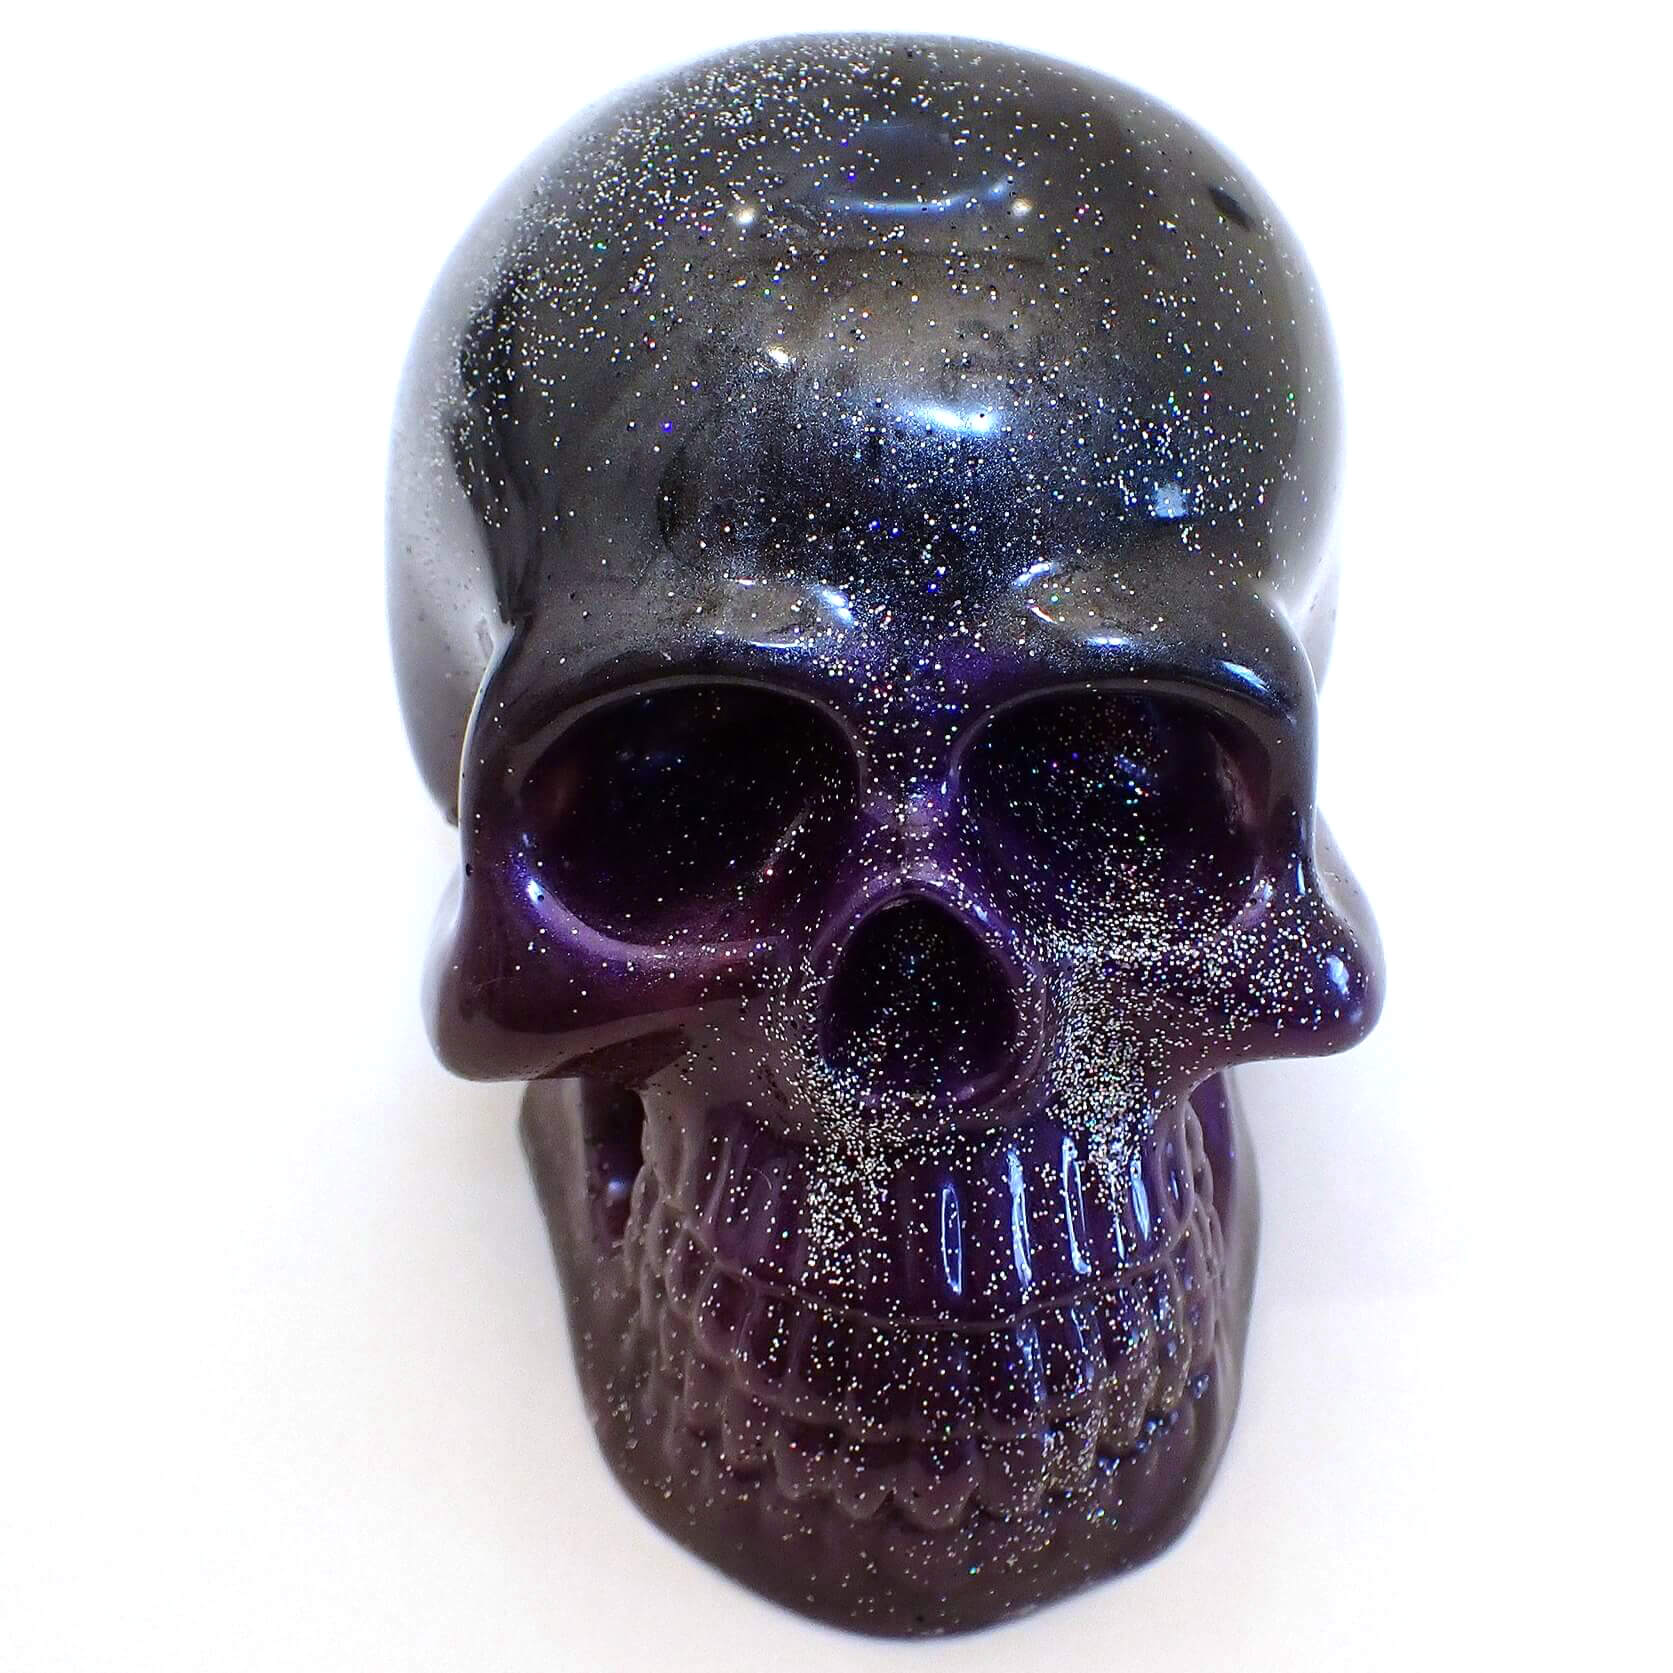 Front view of the handmade resin skull. The top part of the skull is pearly dark gray and black resin. The bottom half of the skull has areas with different shades of purple and dark gray. There is holographic silver glitter mixed in around the whole skull.